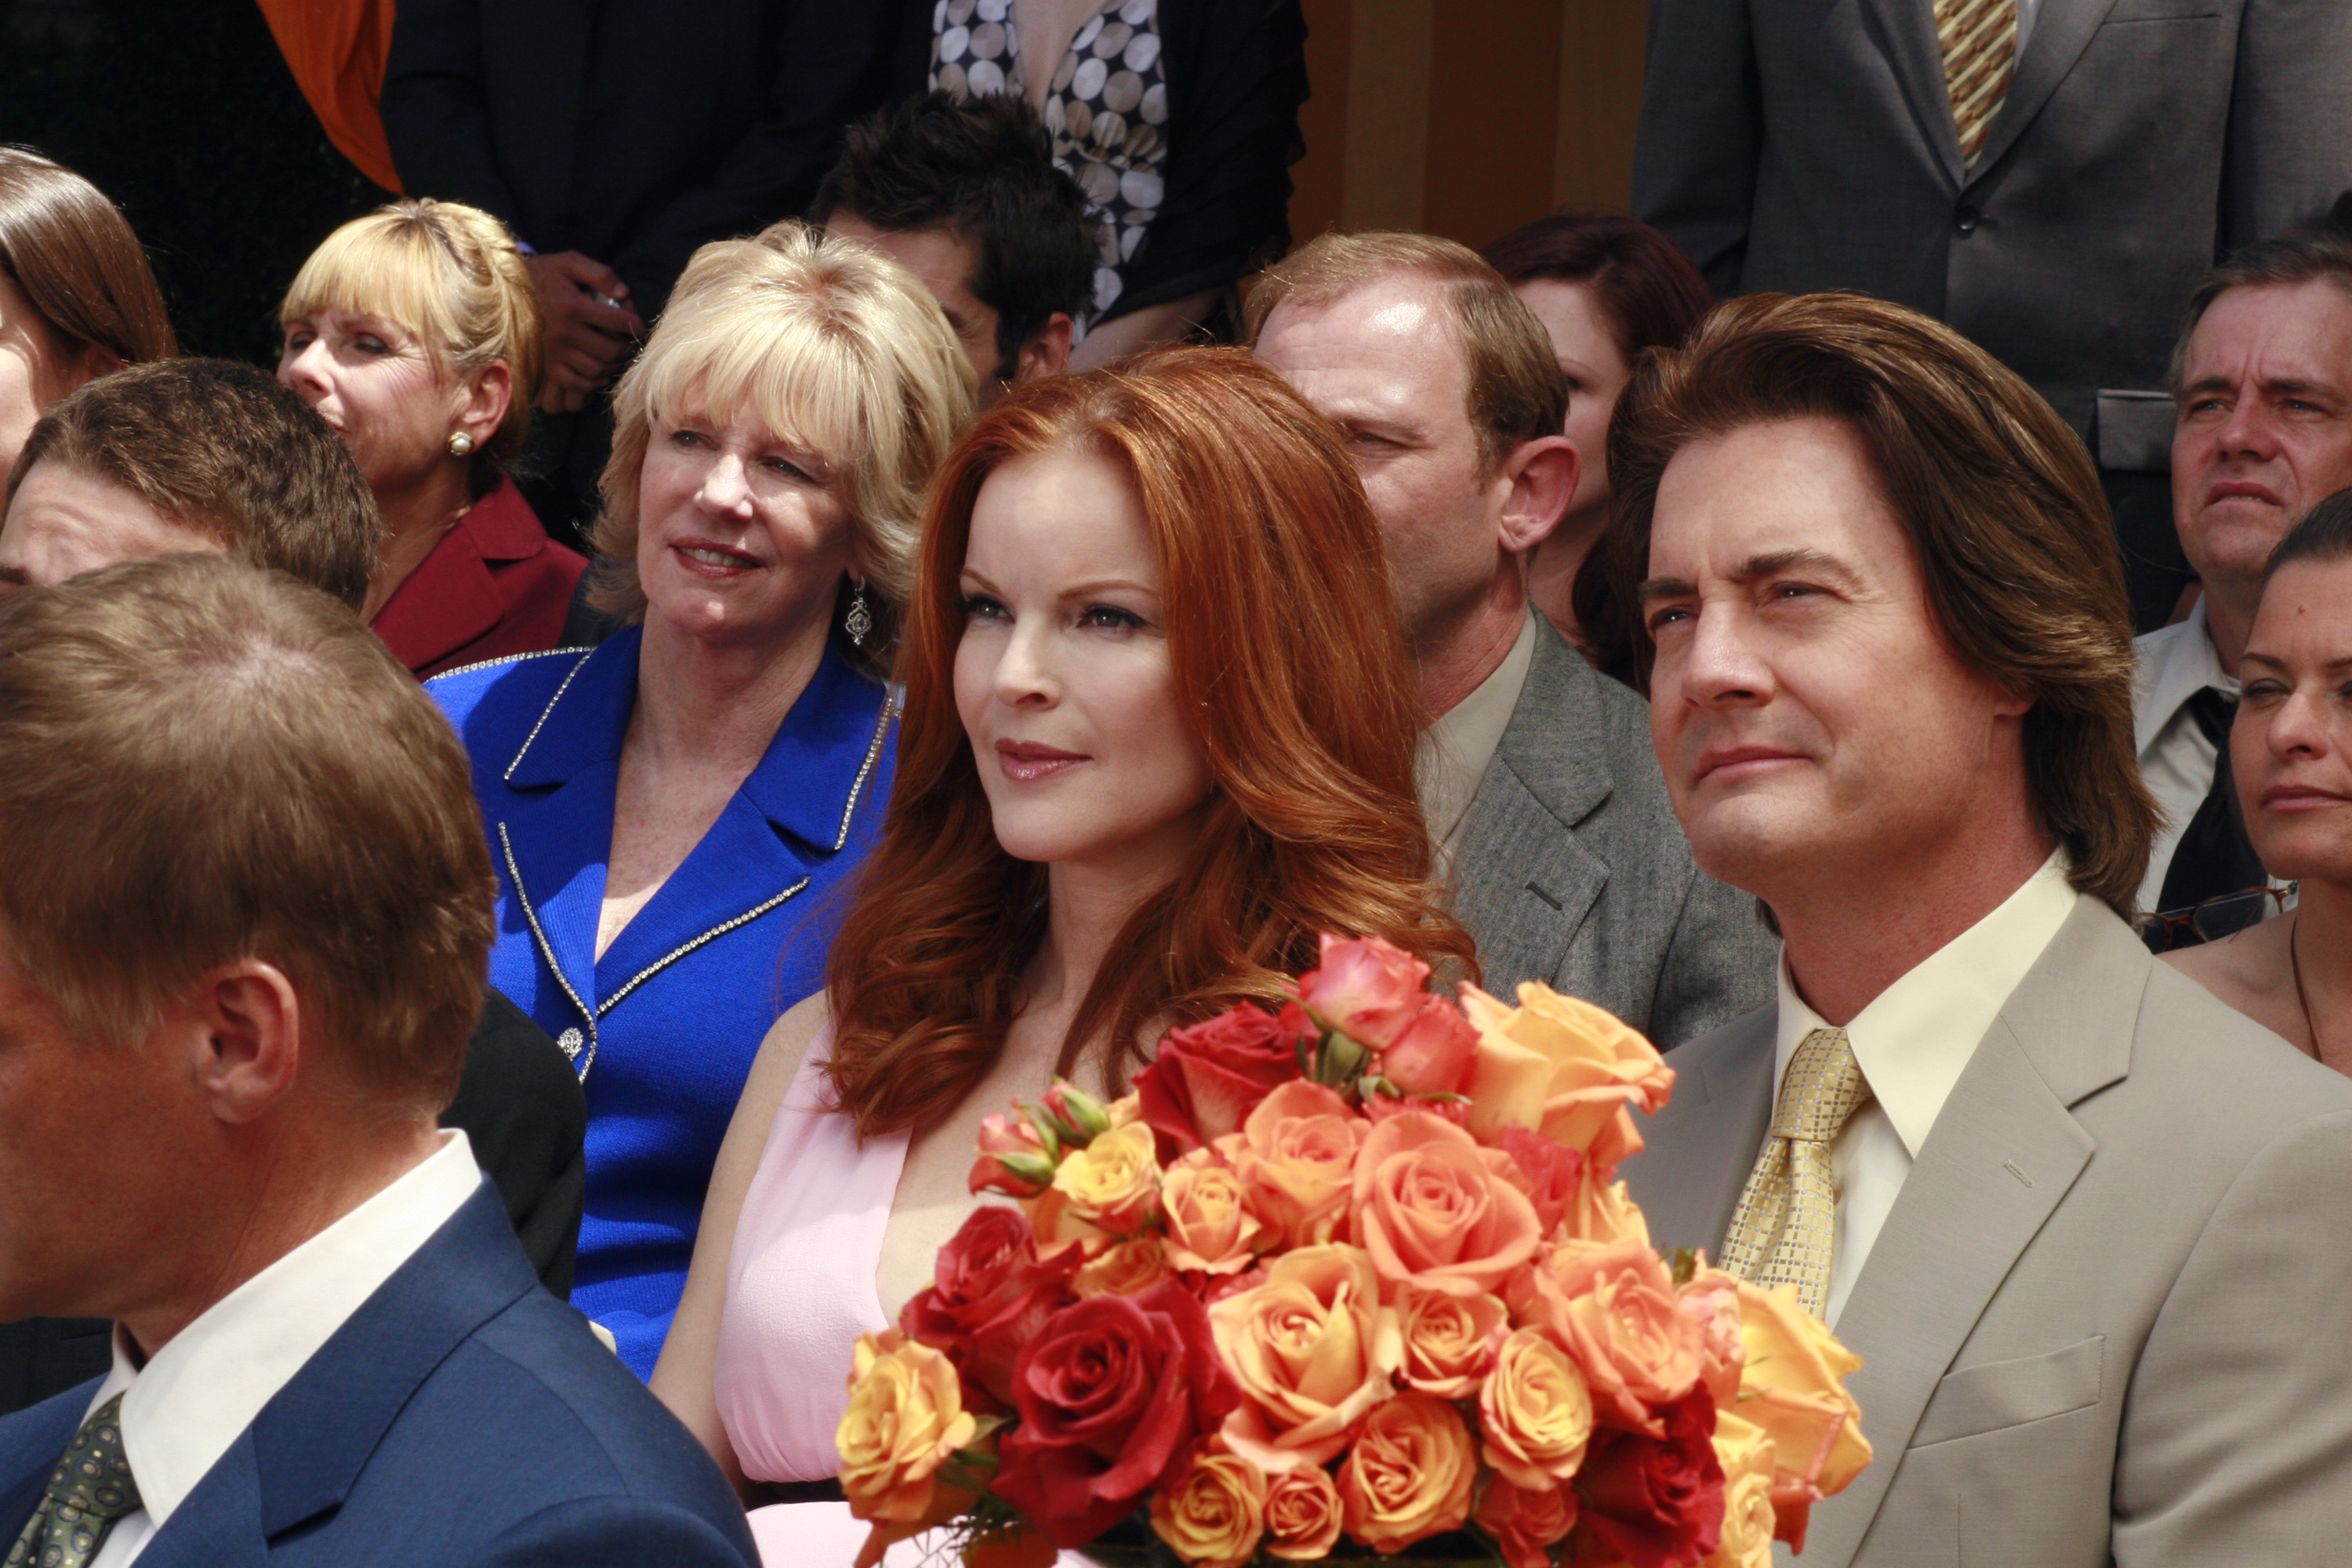 Kyle MacLachlan and Marcia Cross on the set of "Desperate Housewives" in 2007. | Source: Getty Images